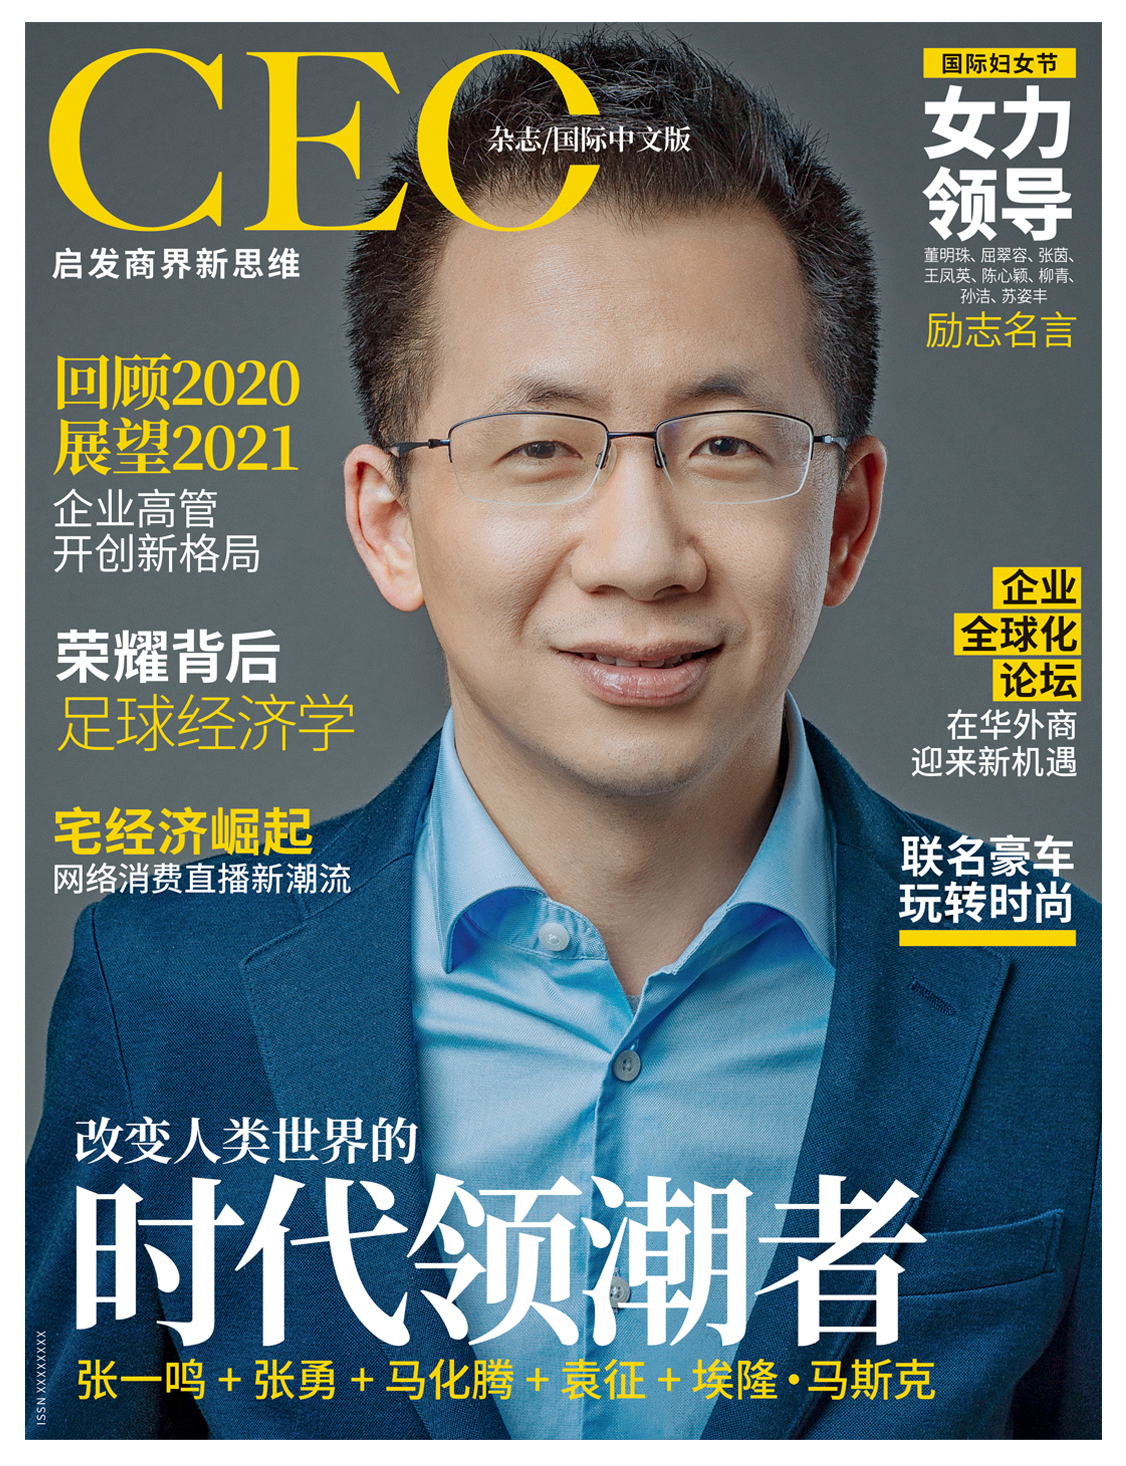 Issue 1 – The CEO Magazine International Chinese Edition